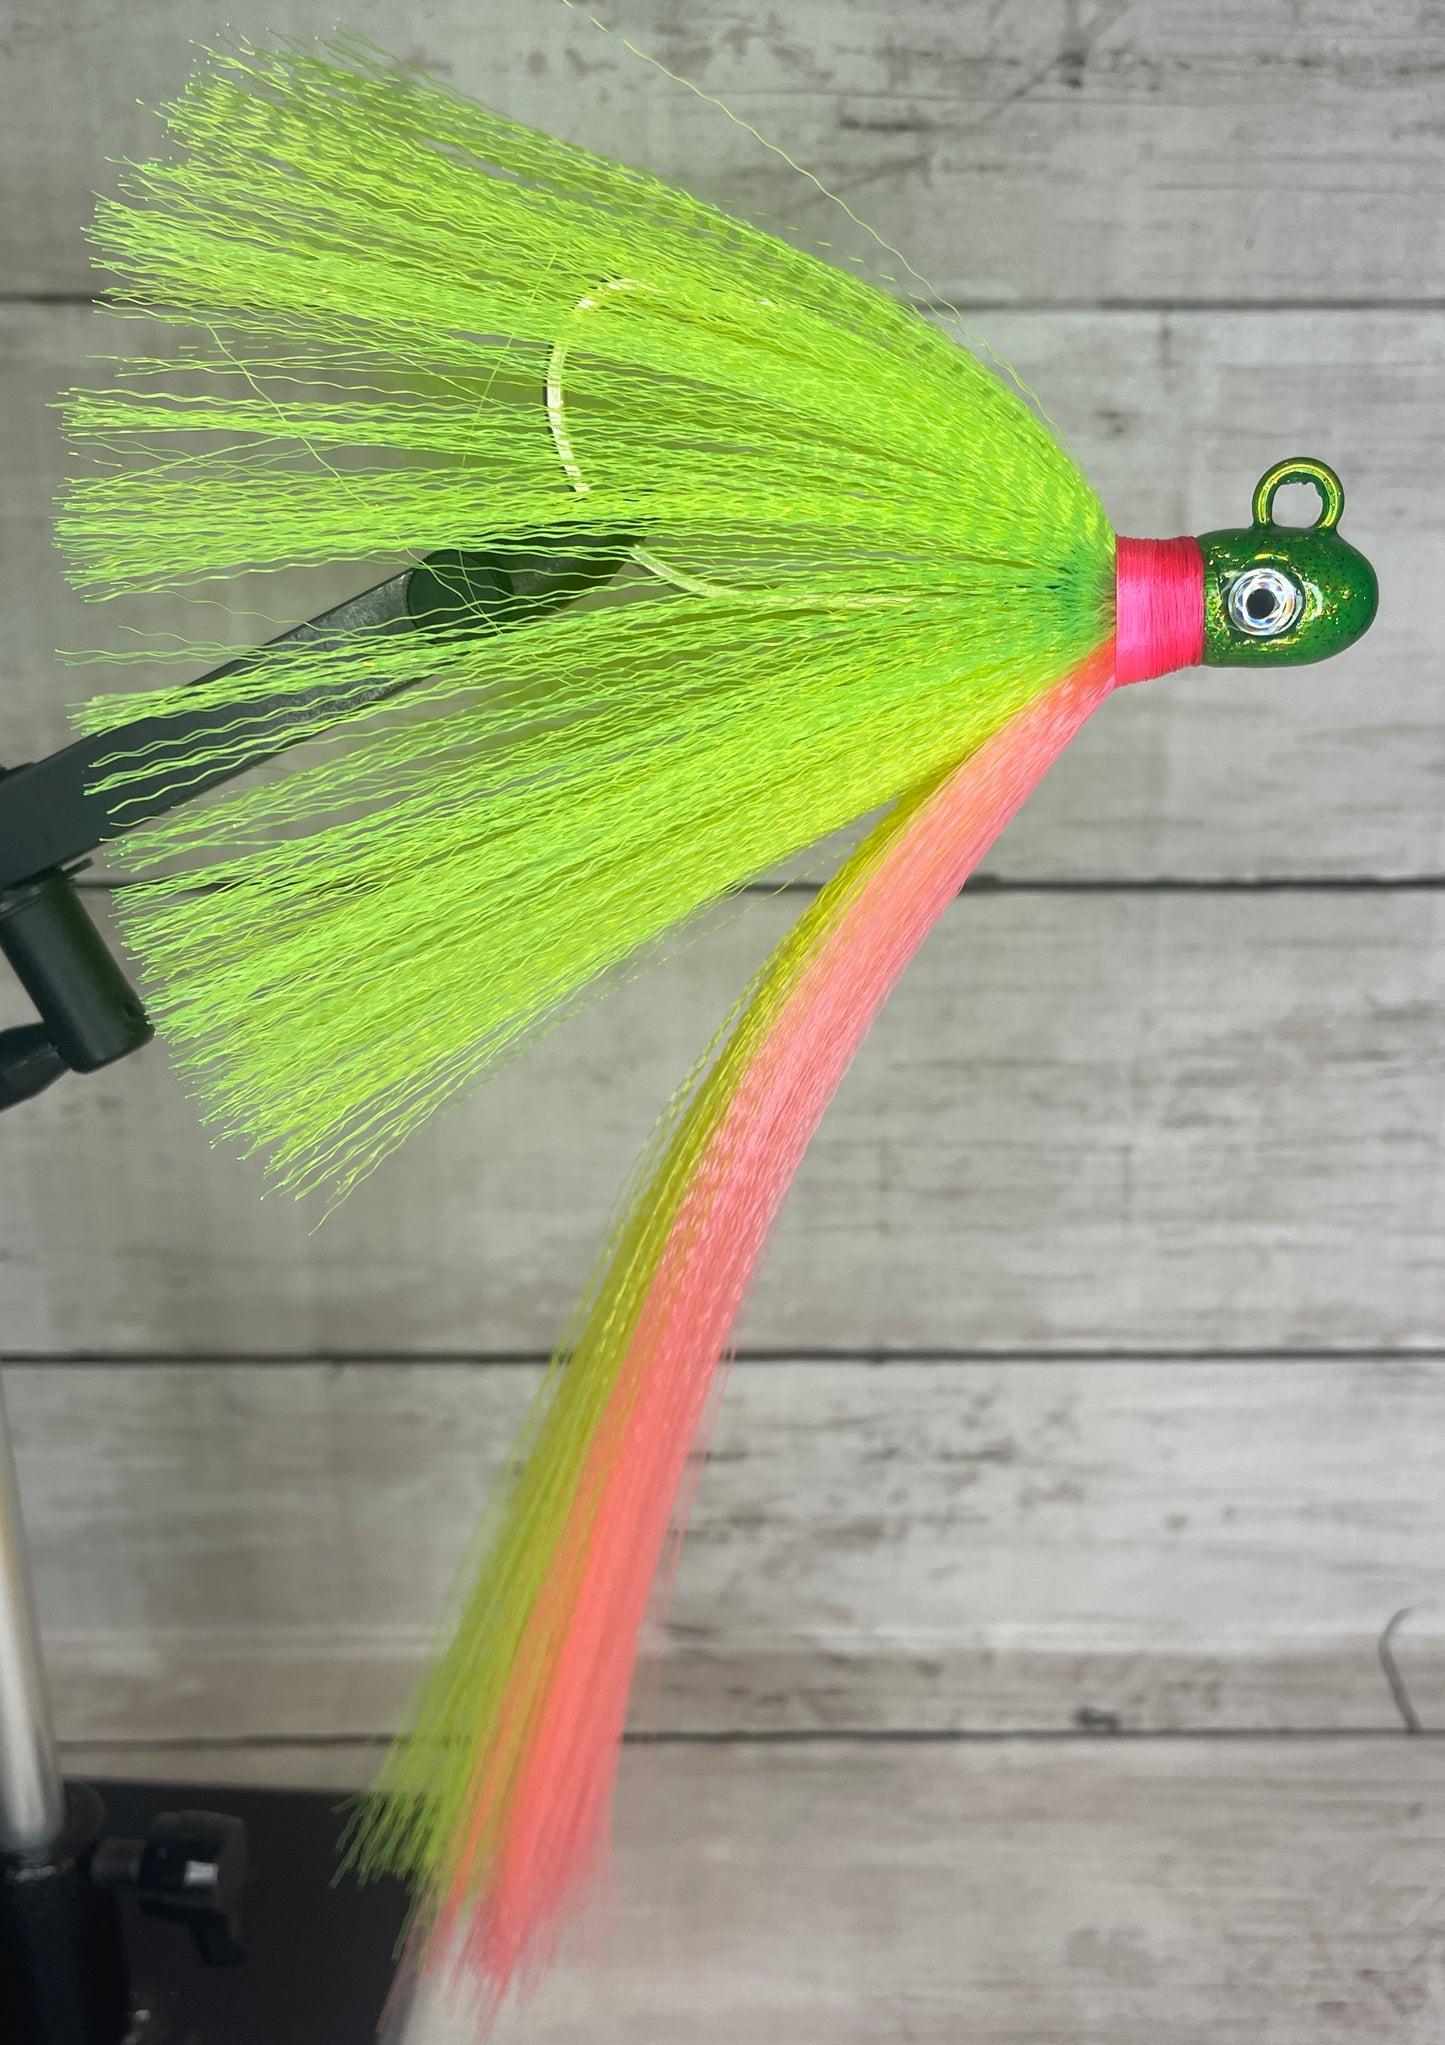 The "Big Flare" Snook Jig